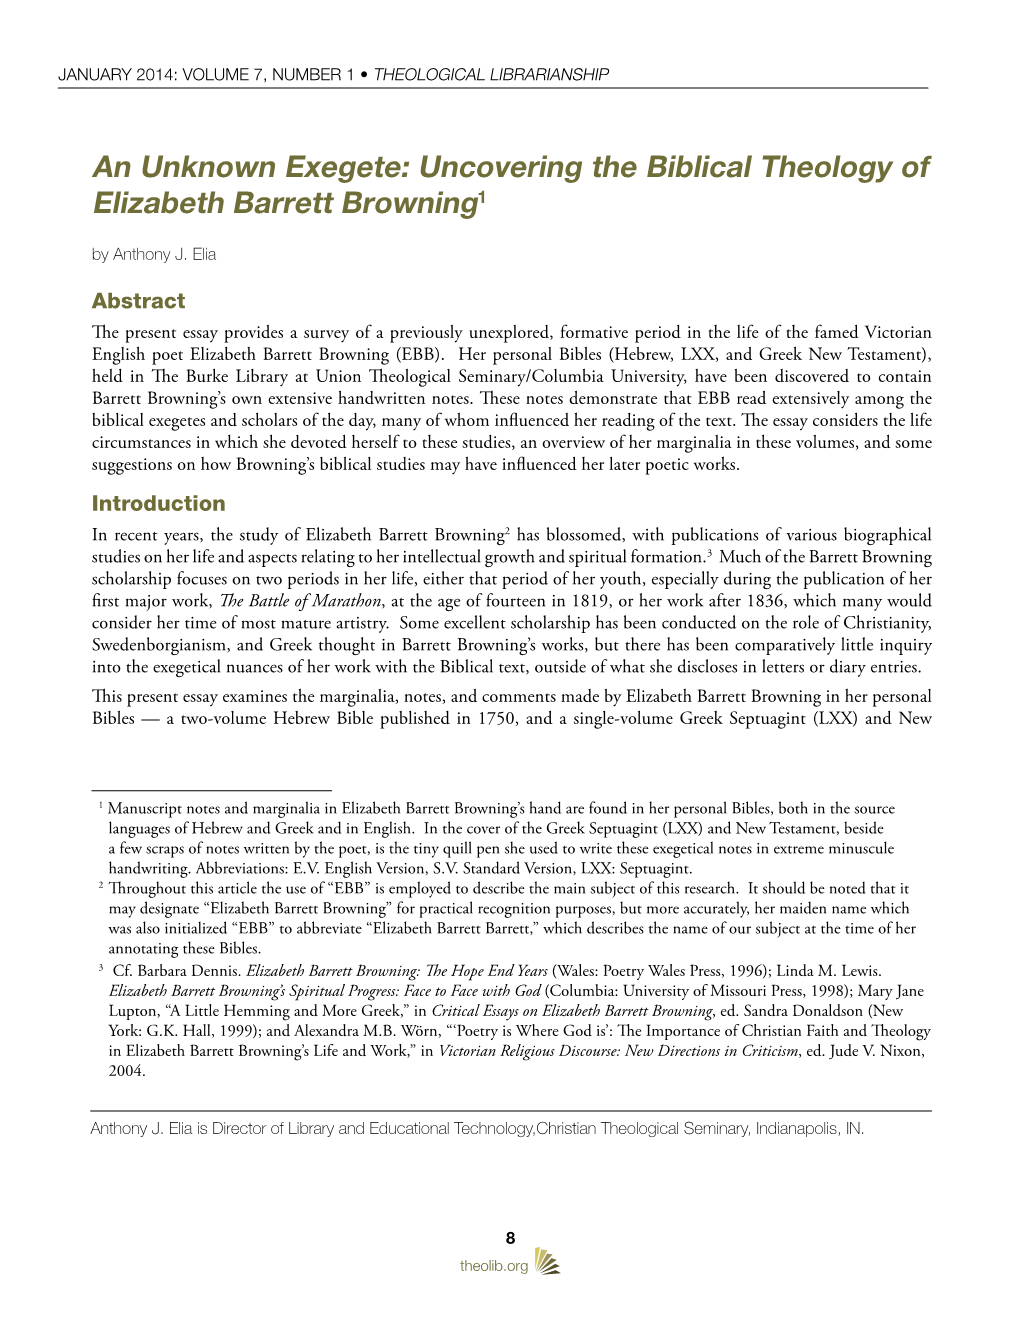 Uncovering the Biblical Theology of Elizabeth Barrett Browning1